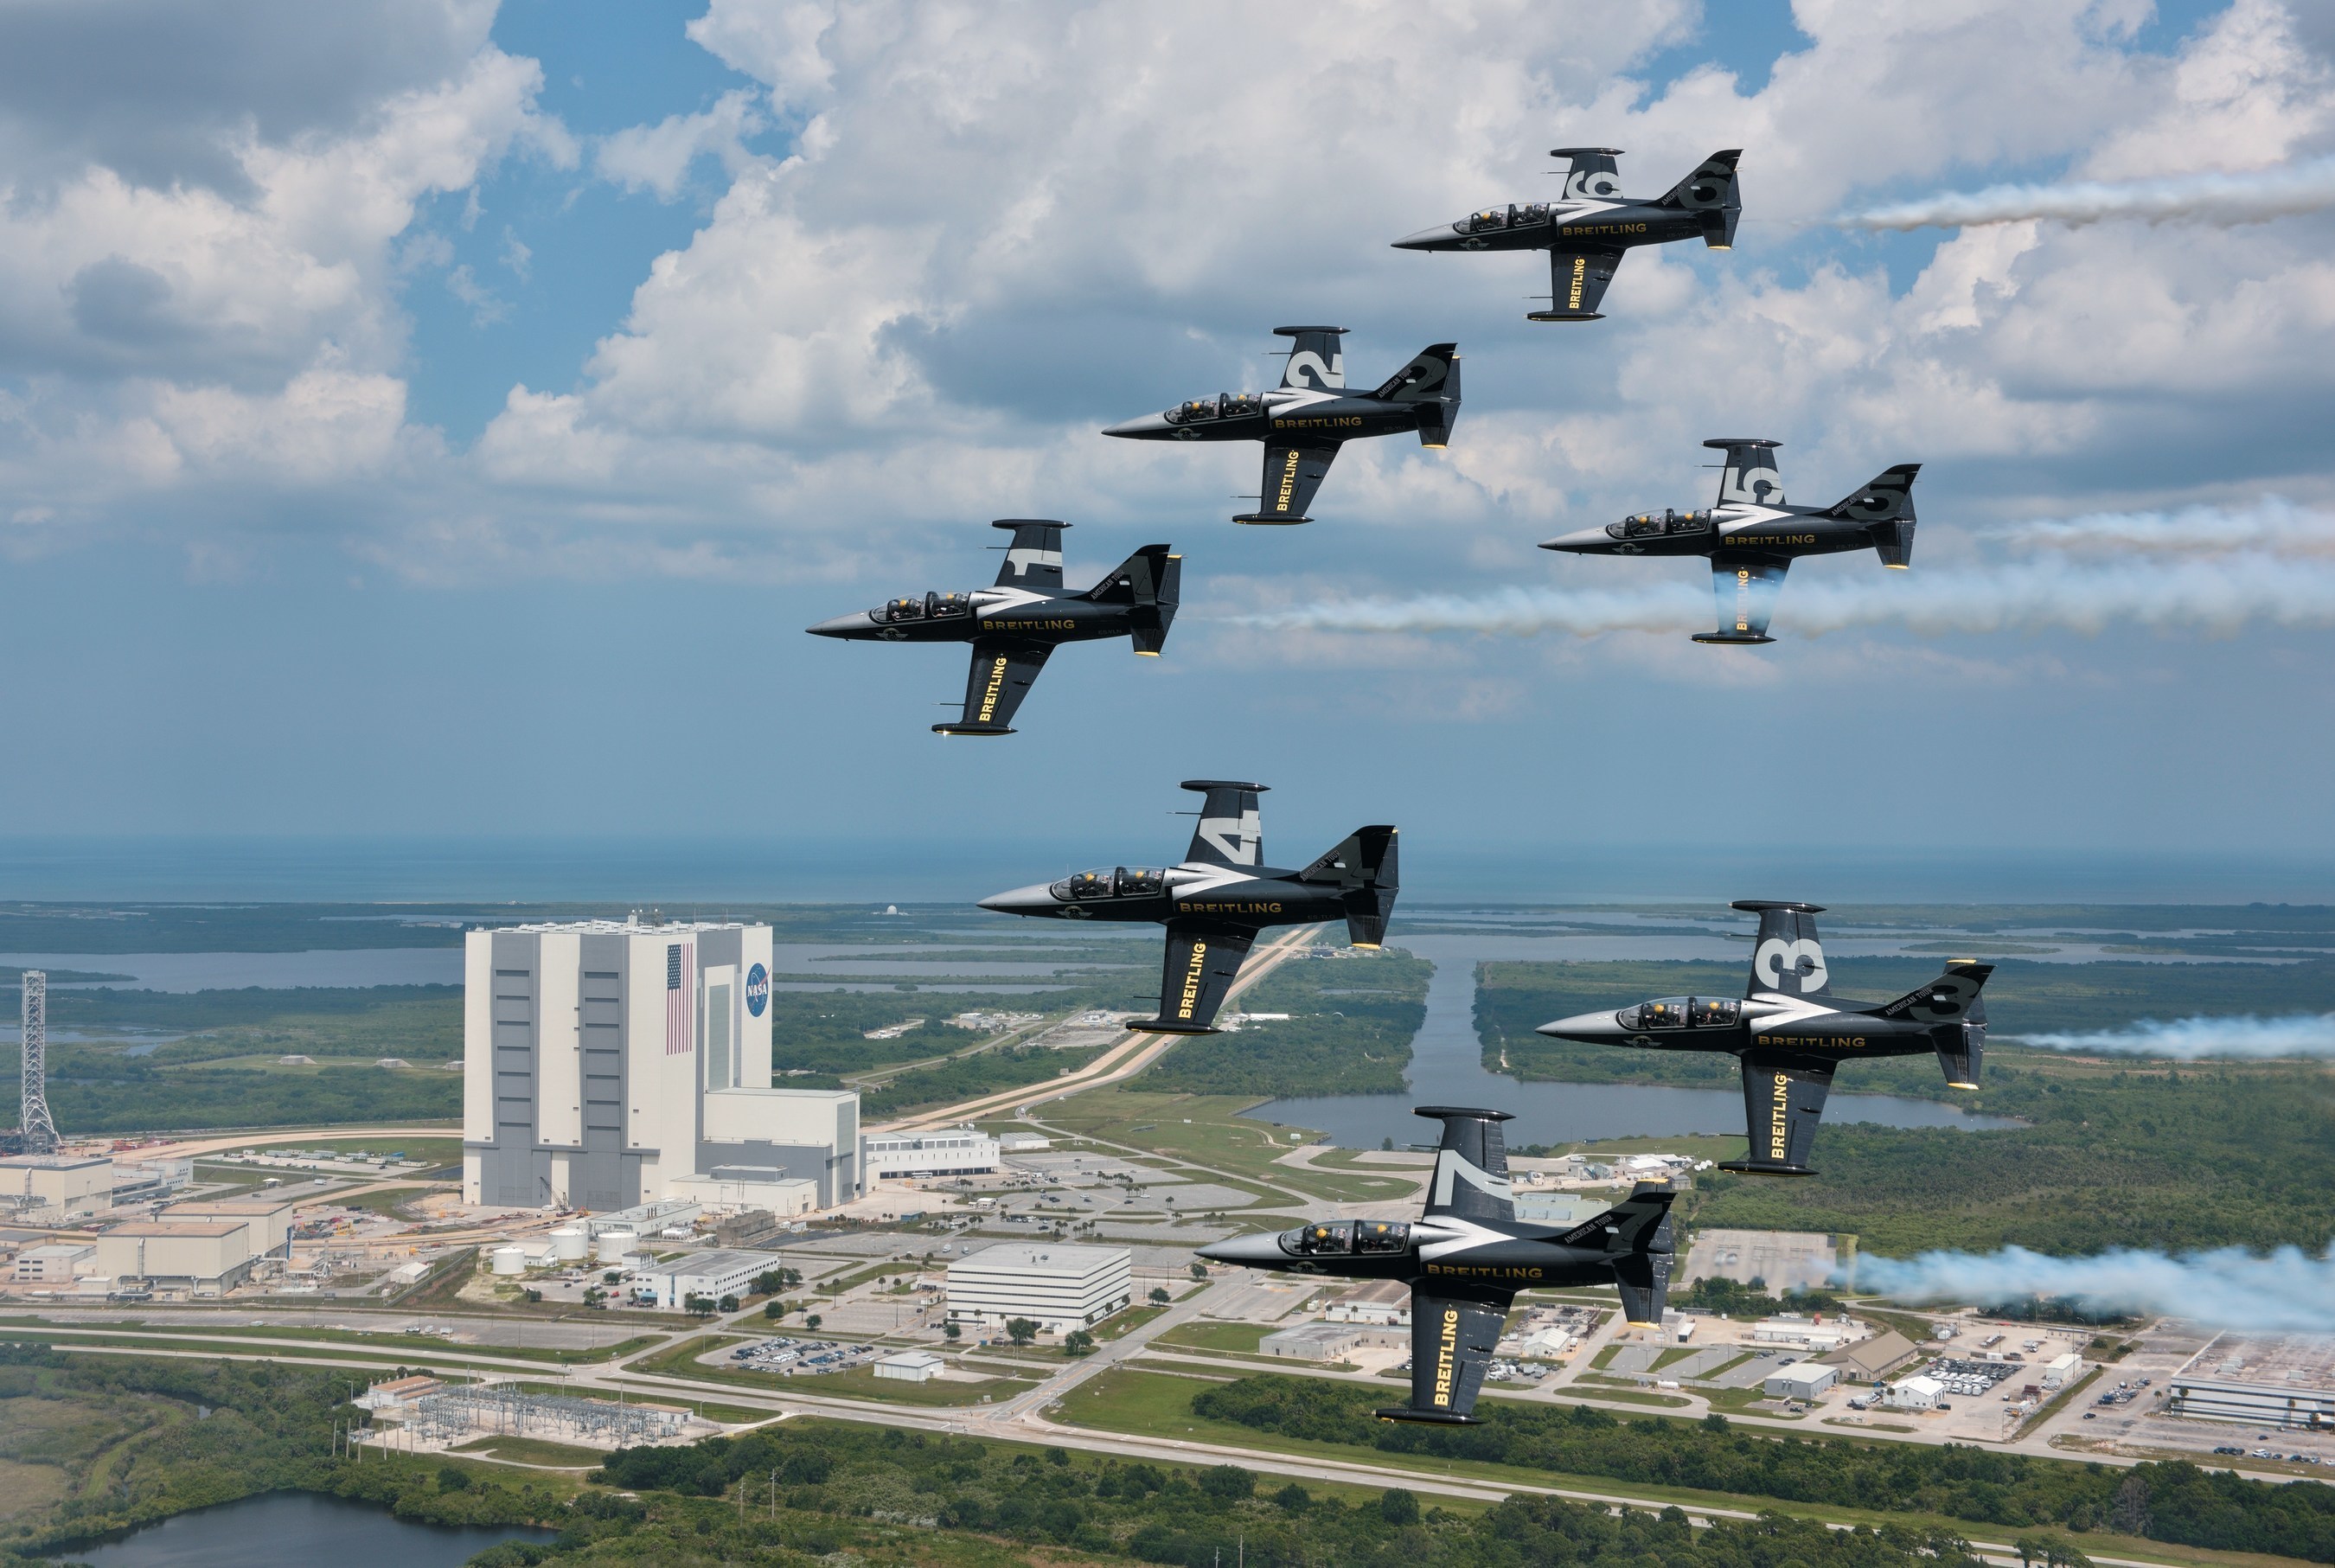 The Breitling Jet Team from Dijon, France, flew past the Kennedy Space Center to mark the start of their first American Tour. The team took off from Linder airport in Lakeland, Florida and landed in Titusville, Florida so they could visit the iconic space shuttle launch site. The team is also performing at the Sun 'n Fun Fly-In & International Expo on Friday, April 24th and Saturday, April 25th representing the independent Swiss watch company Breitling. Photo Courtesy of Breitling/Katushiko Tokunaga